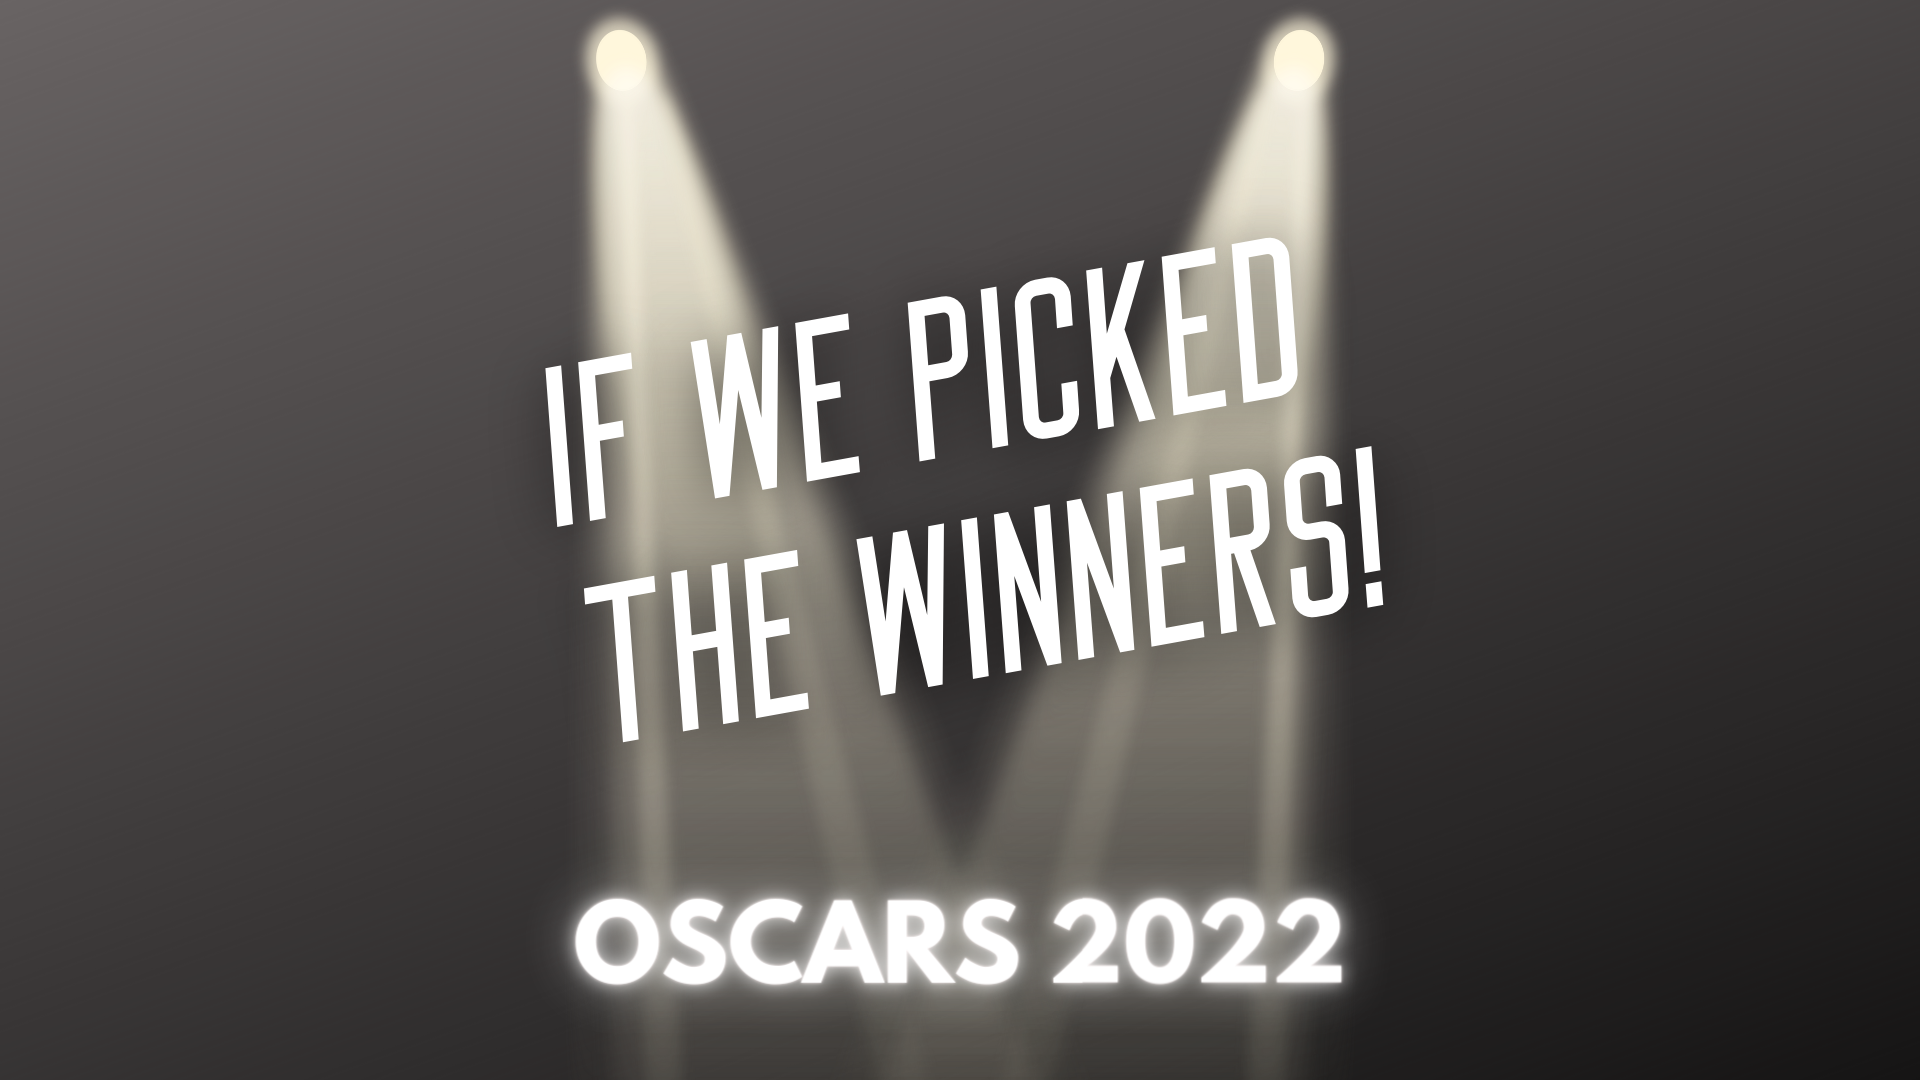 Oscars 2022 – If We Picked the Winners!